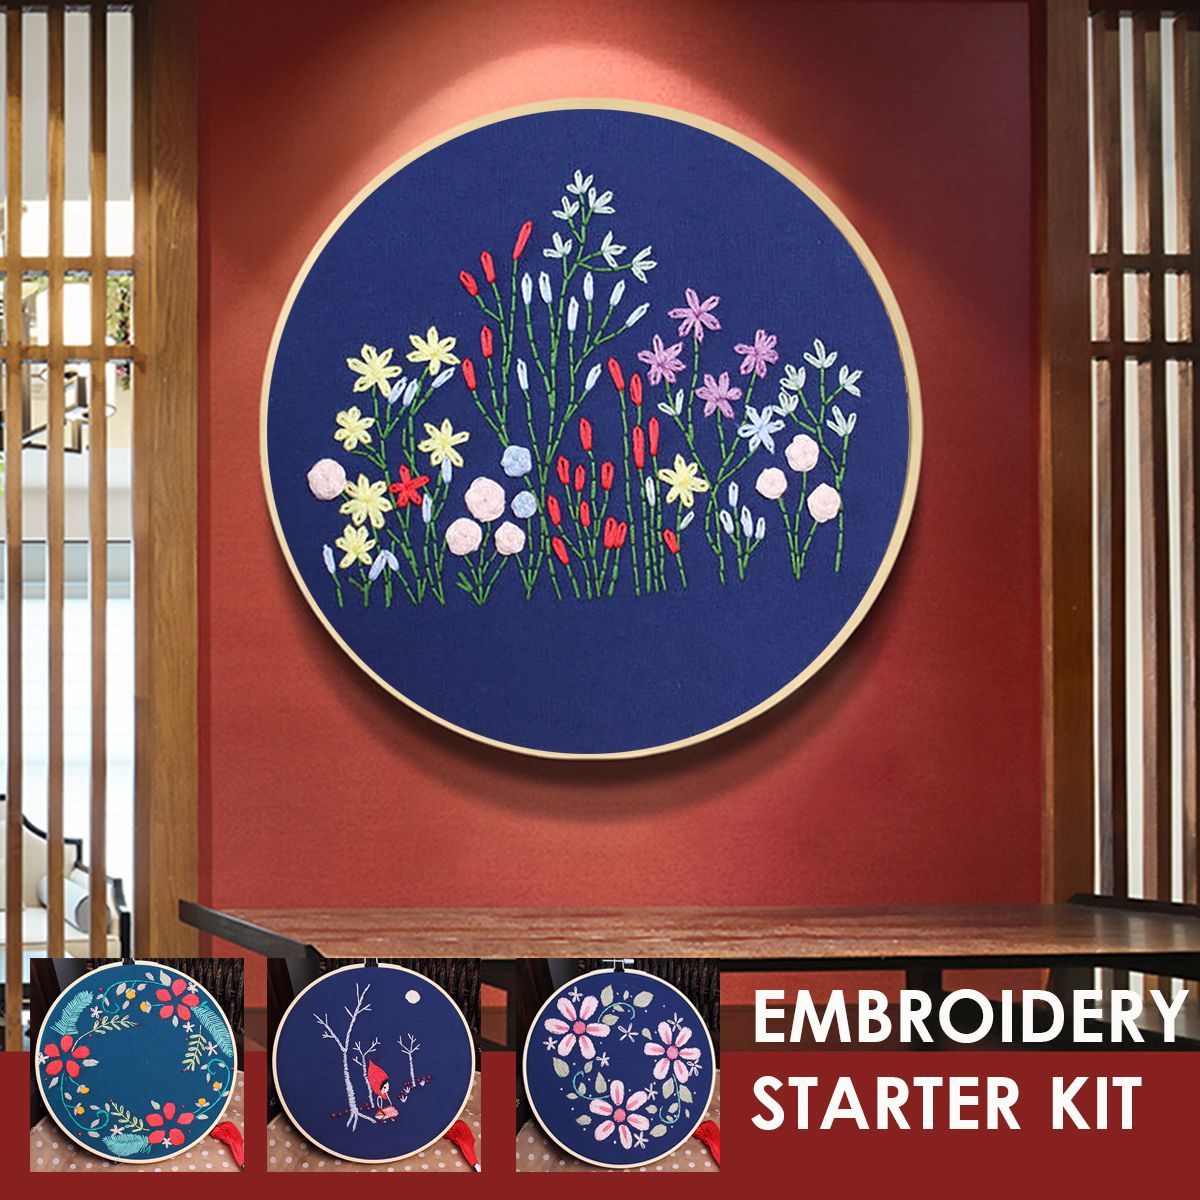 Embroidery-Kit-for-Beginner-Flower-Pattern-Cross-Stitch-Needlework-Without-Hoop-1742700